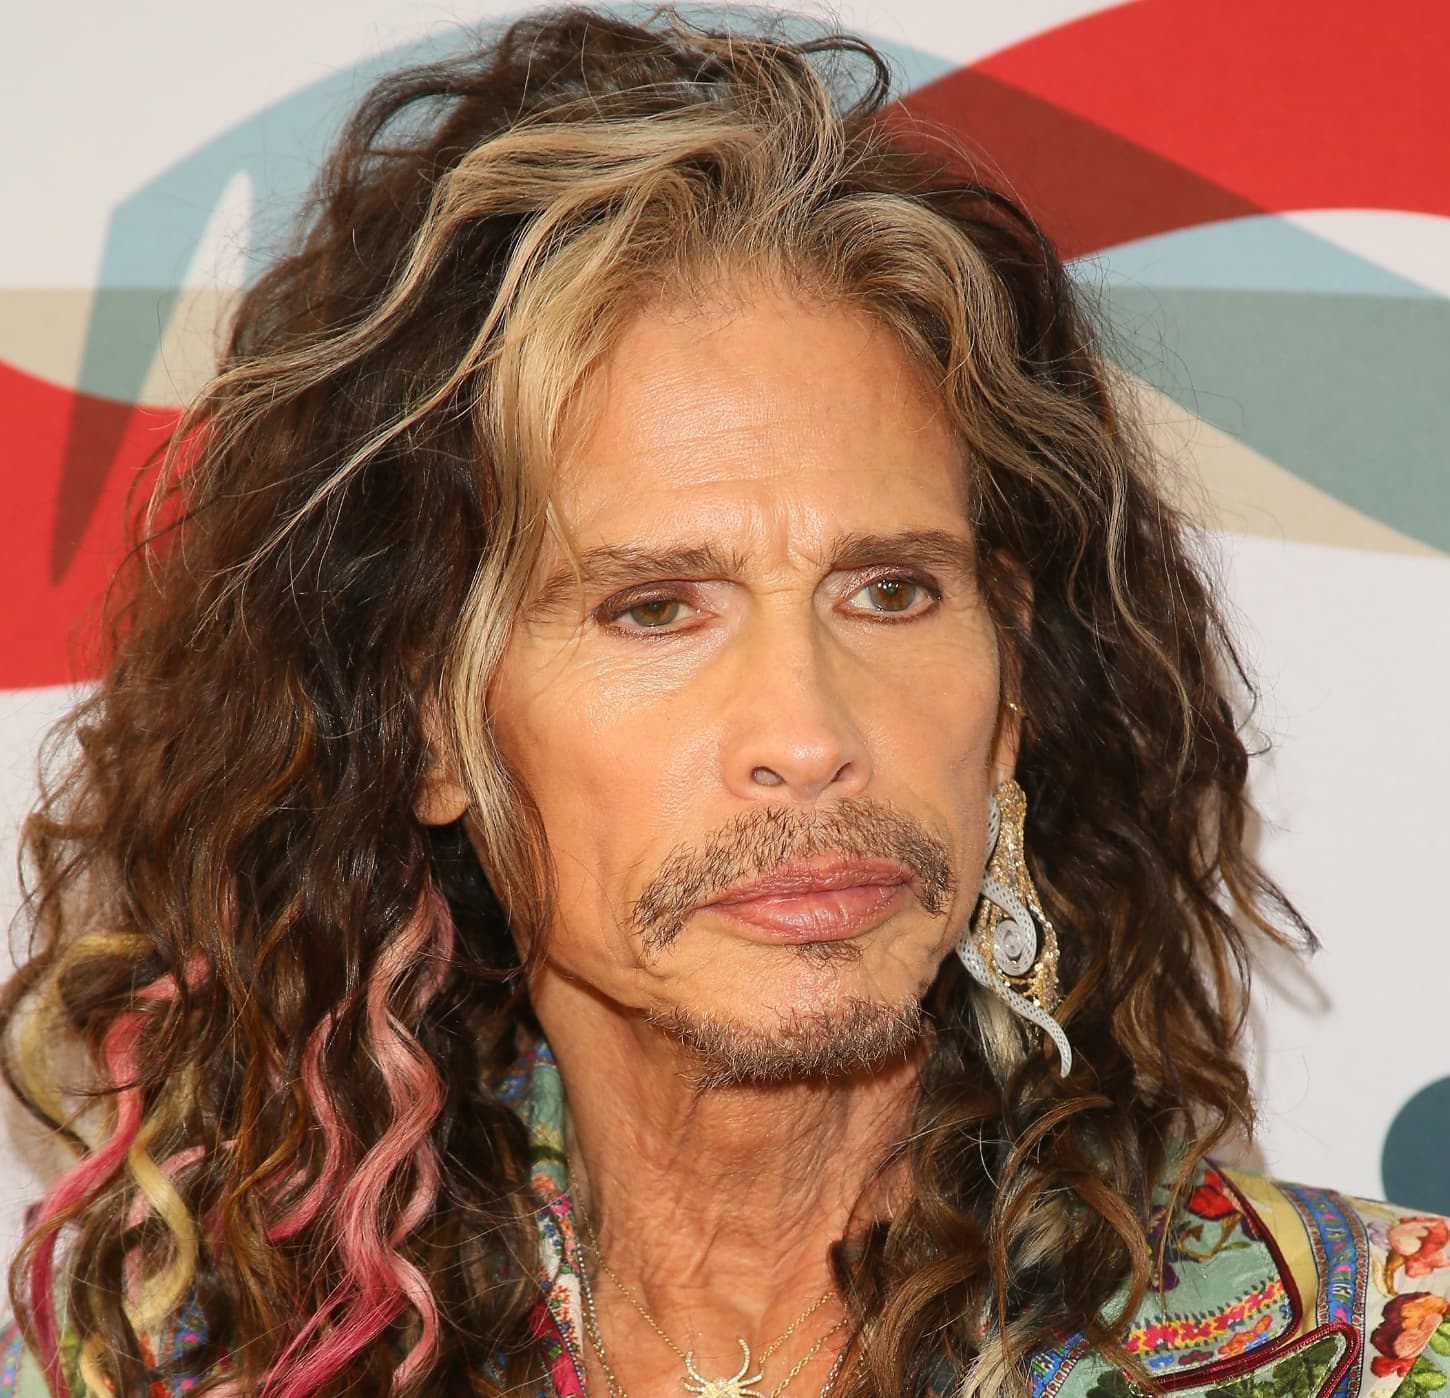 “Steven Tyler once had a [16]-year-old girlfriend that her parents signed over to him”